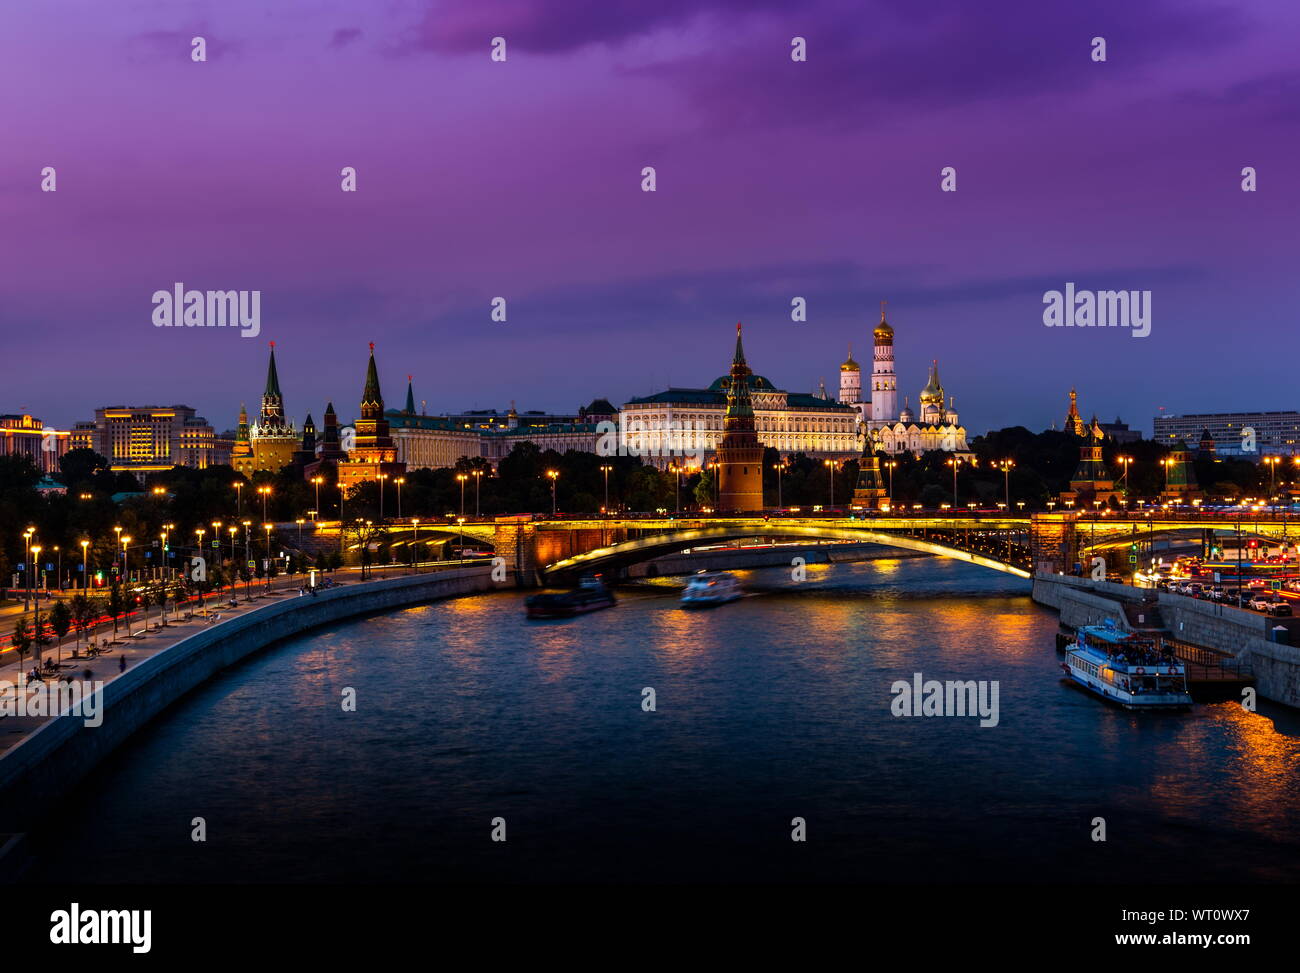 Illuminated Moscow Kremlin, Kremlin Embankment and Moscow River at night in Moscow, Russia. Stock Photo